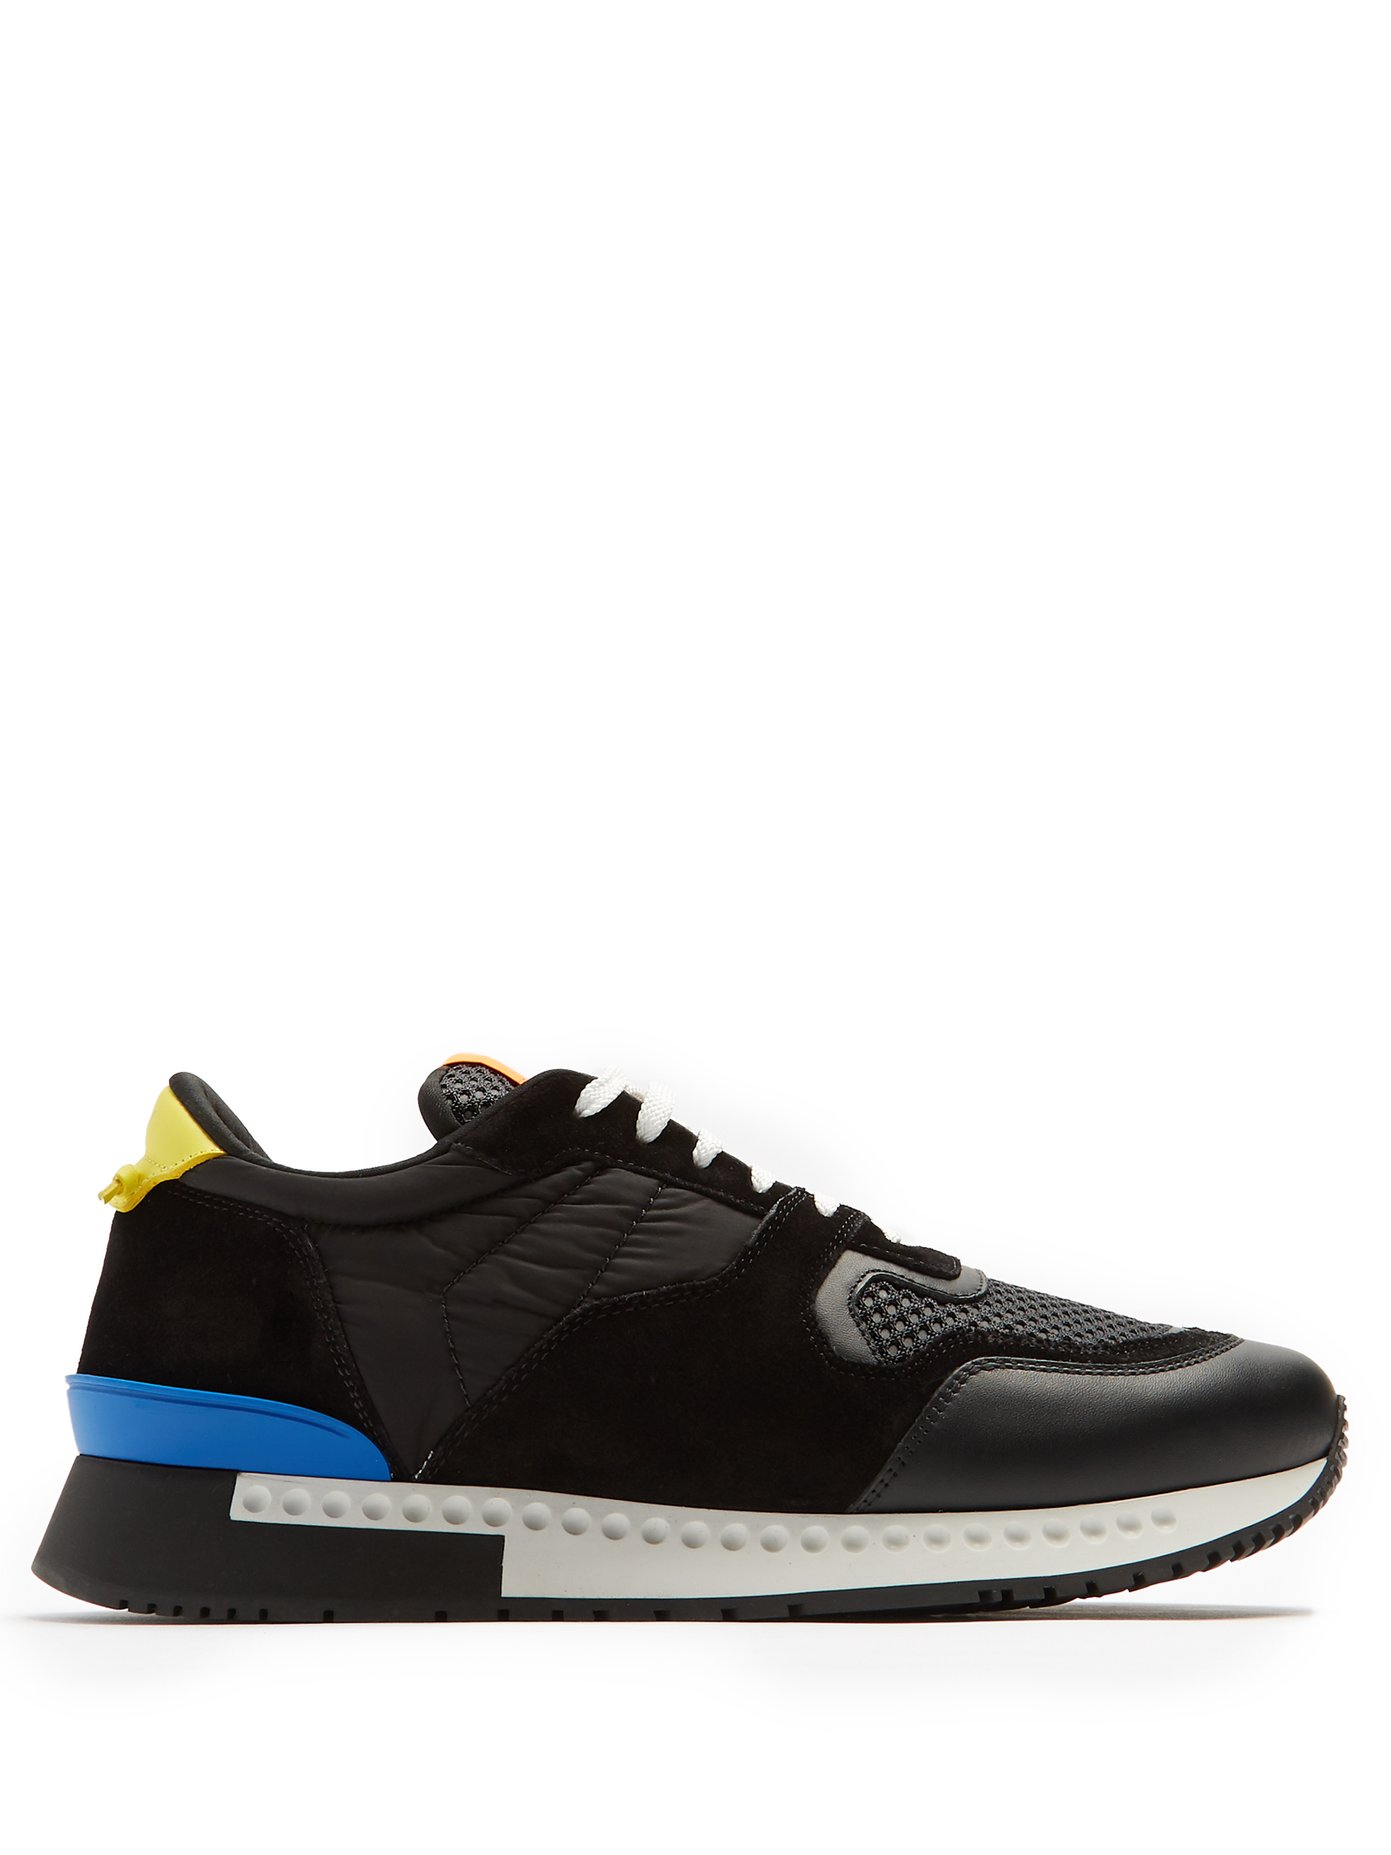 givenchy runners men